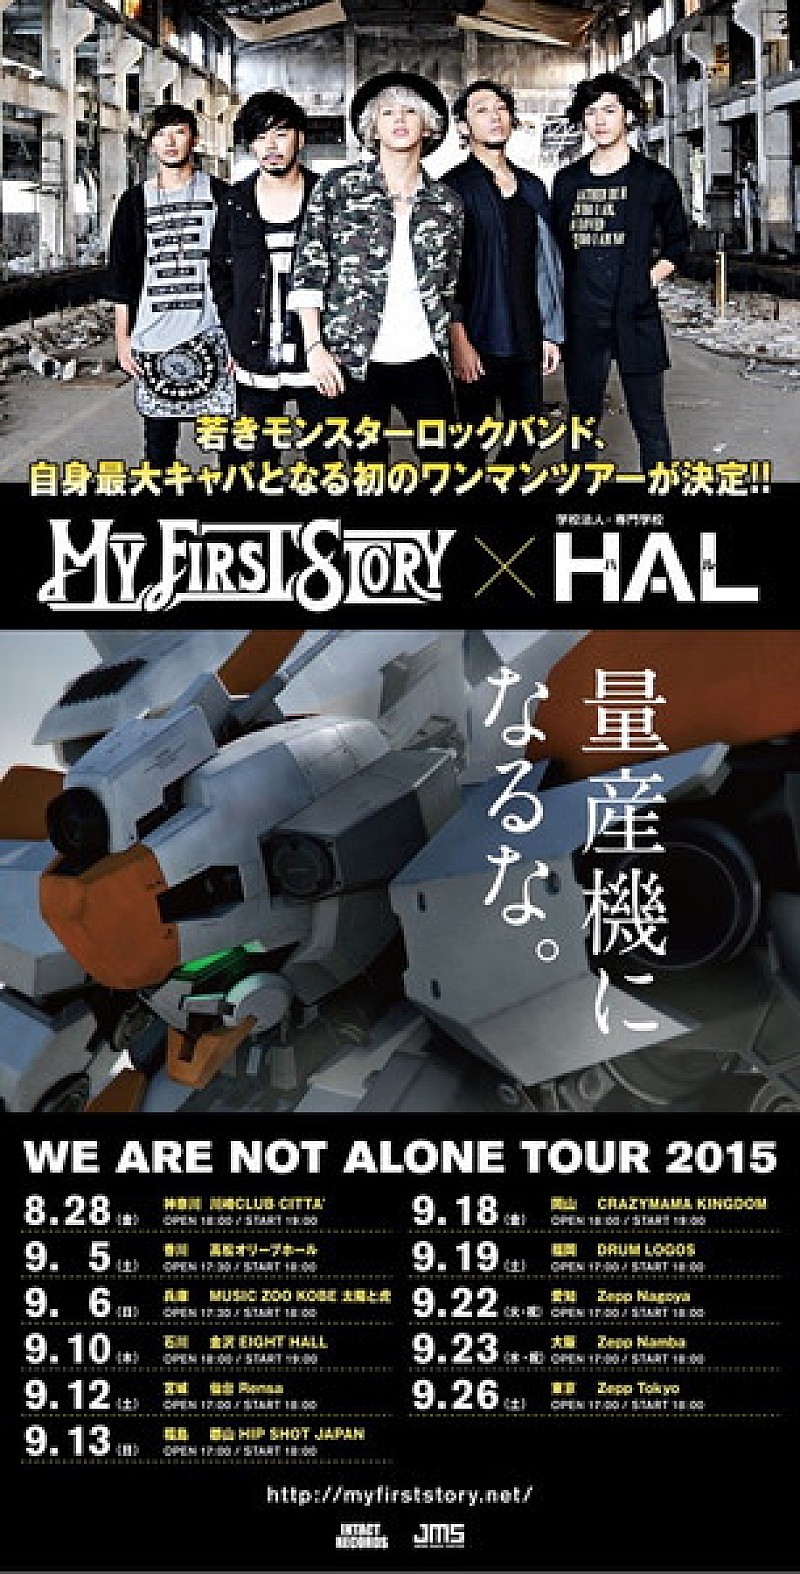 MY FIRST STORY「MY FIRST STORY、初のワンマンツアー開催決定」1枚目/1